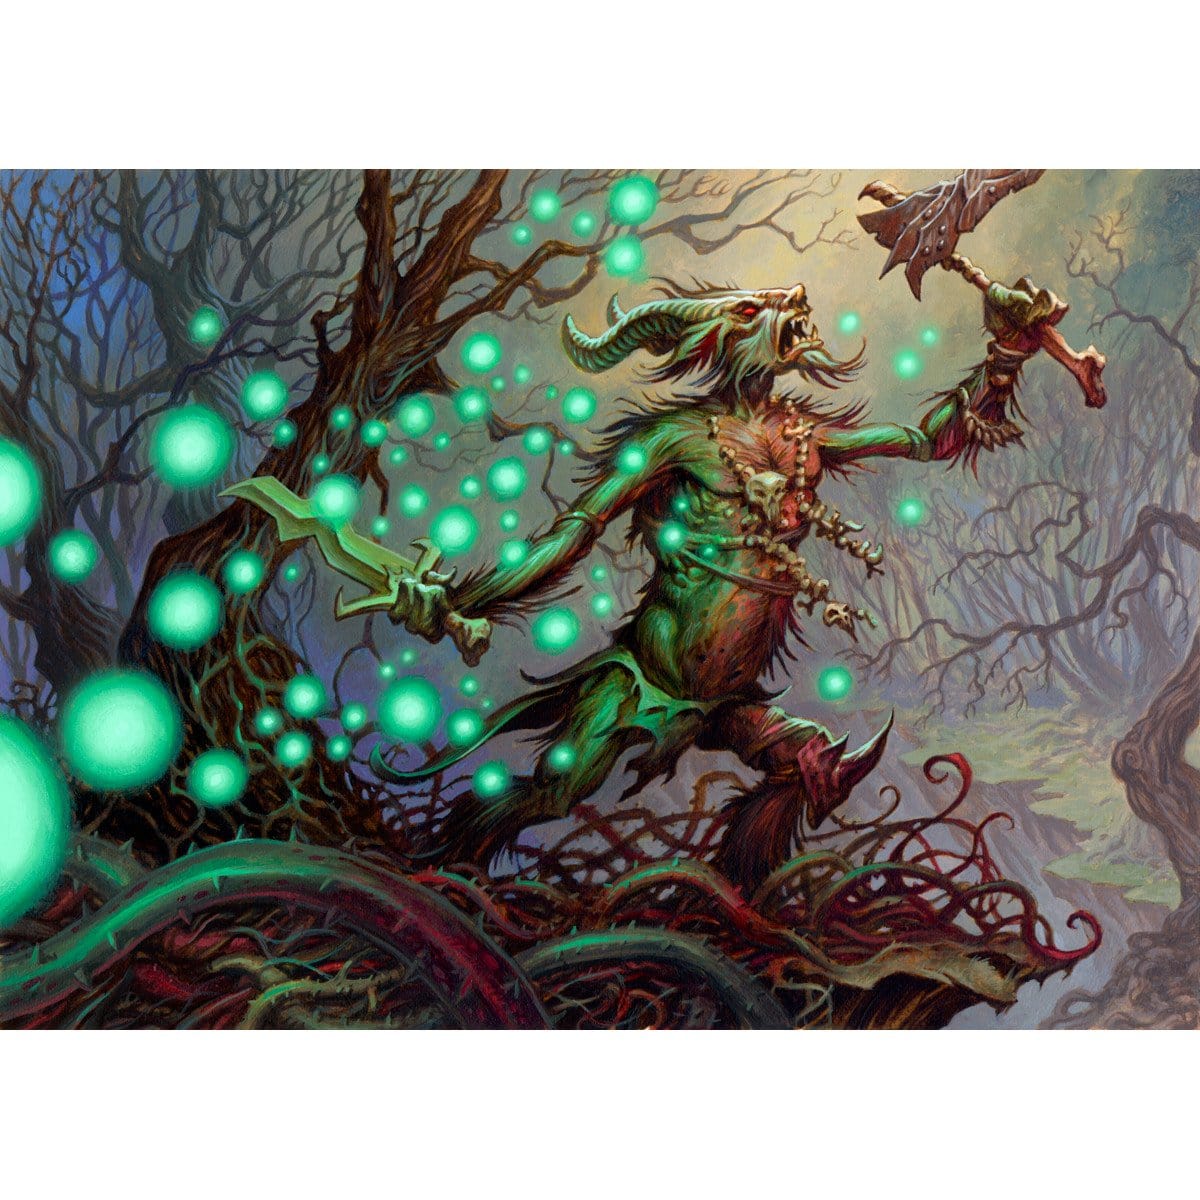 Viridescent Wisps Print - Print - Original Magic Art - Accessories for Magic the Gathering and other card games